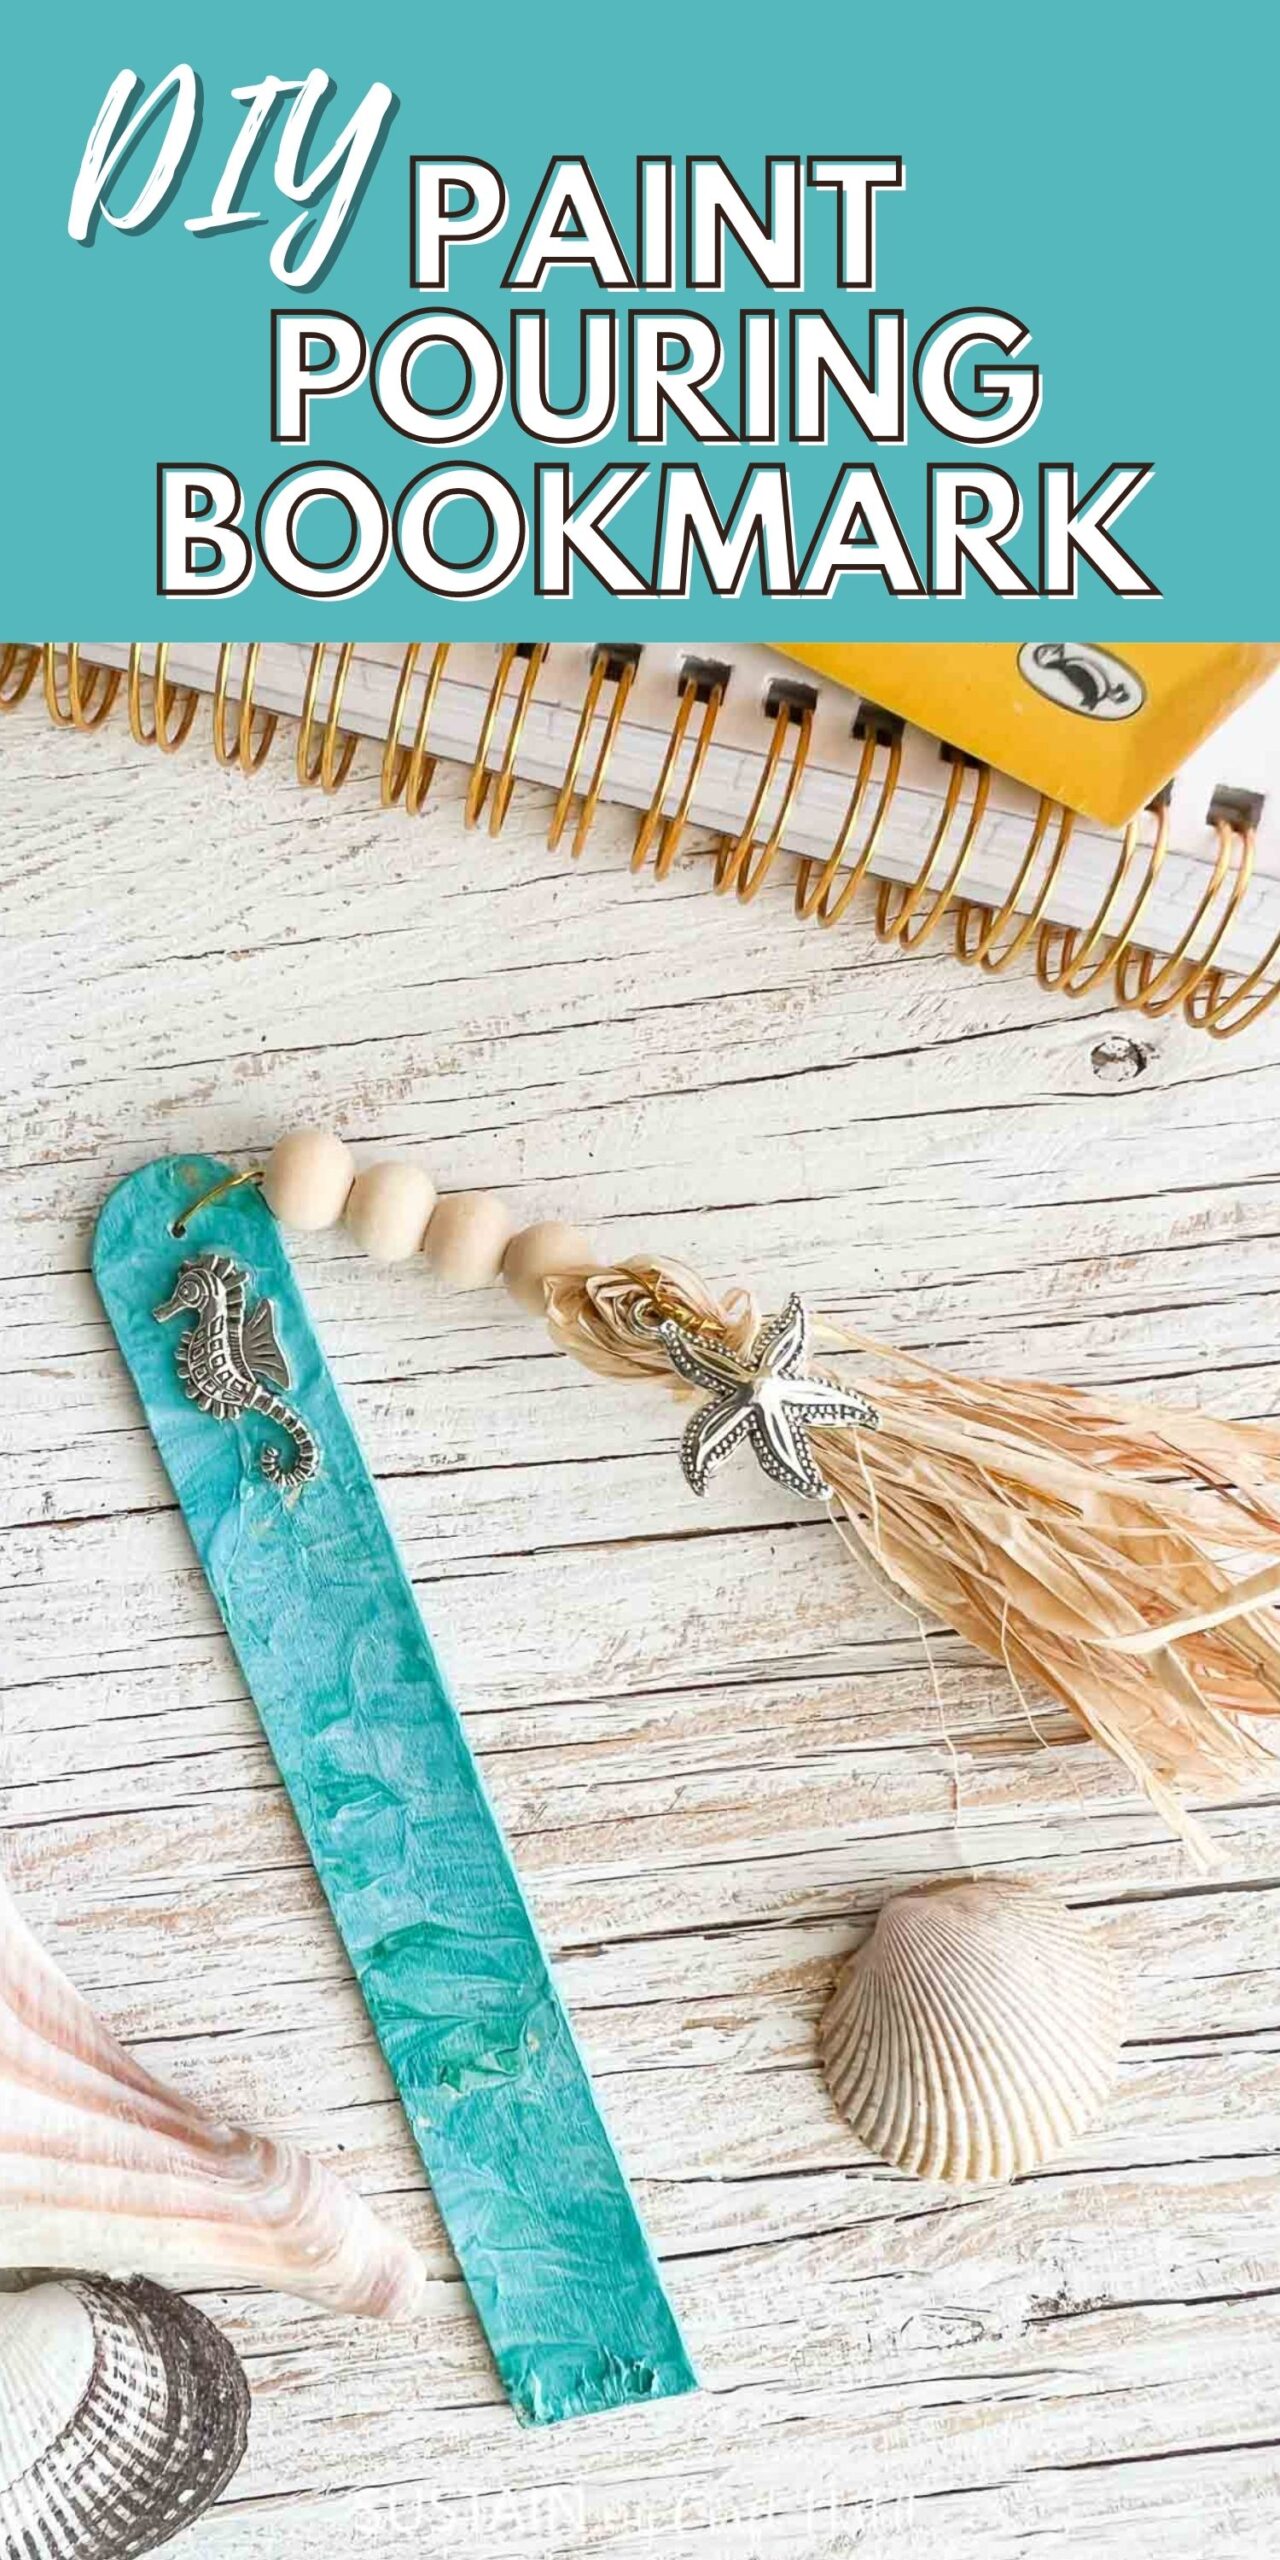 Paint poured beachy bookmark made with beach charms, wood beads and a tassel with text overlay.